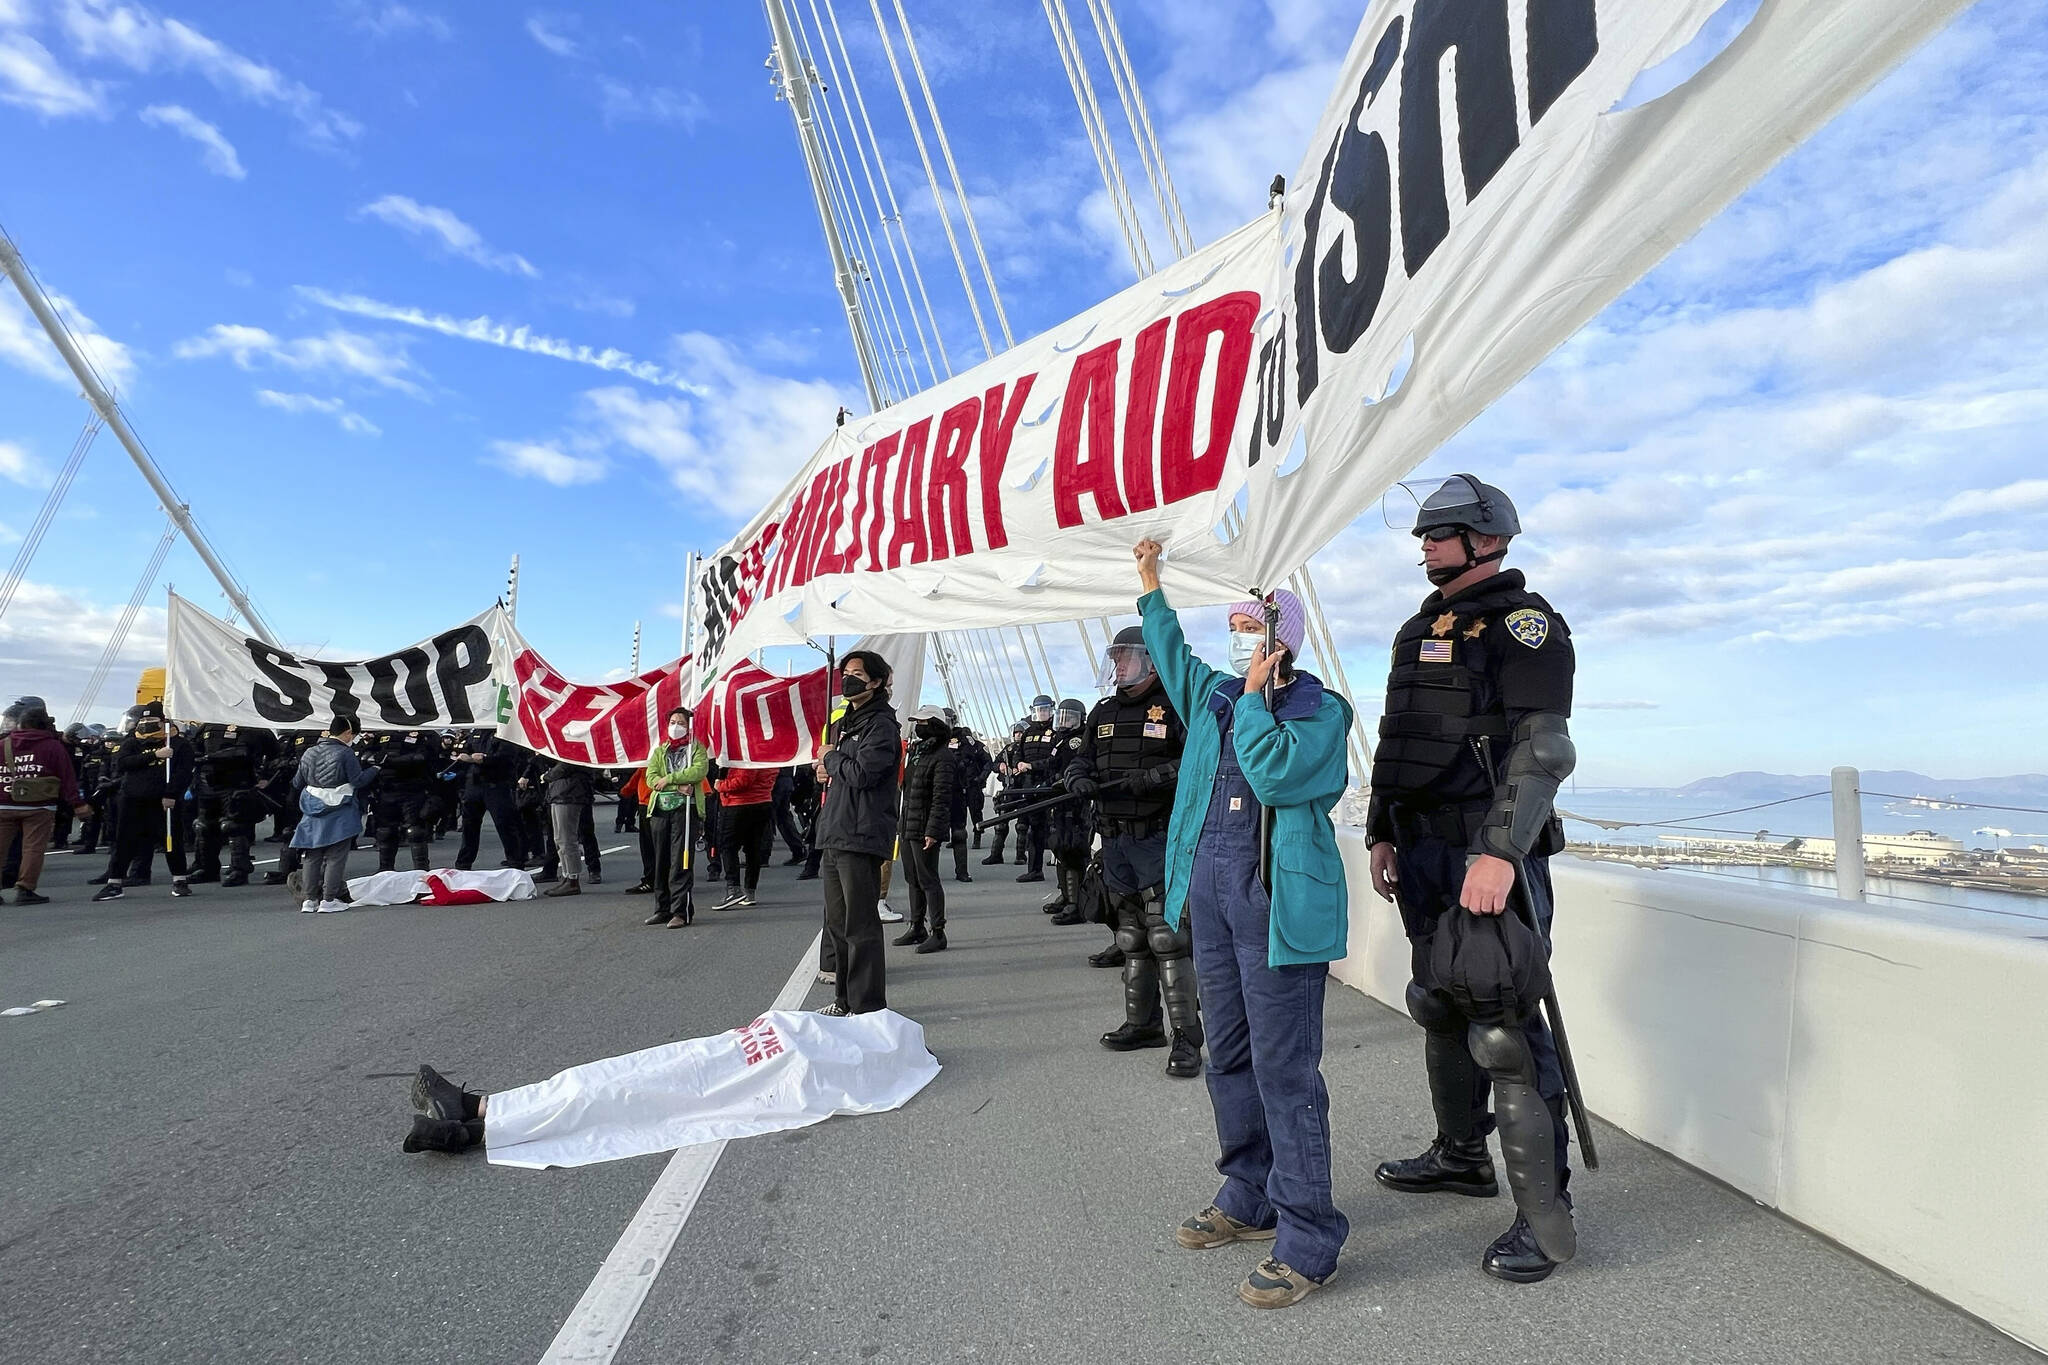 Demonstrators shut down the San Francisco Oakland Bay Bridge in conjunction with the APEC Summit taking place Thursday, Nov. 16, in San Francisco. San Francisco’s District Attorney’s Office on Monday began charging demonstrators who blocked traffic for hours last month on the Bay Bridge to demand a cease-fire in Gaza. (AP Photo/Noah Berger, File)